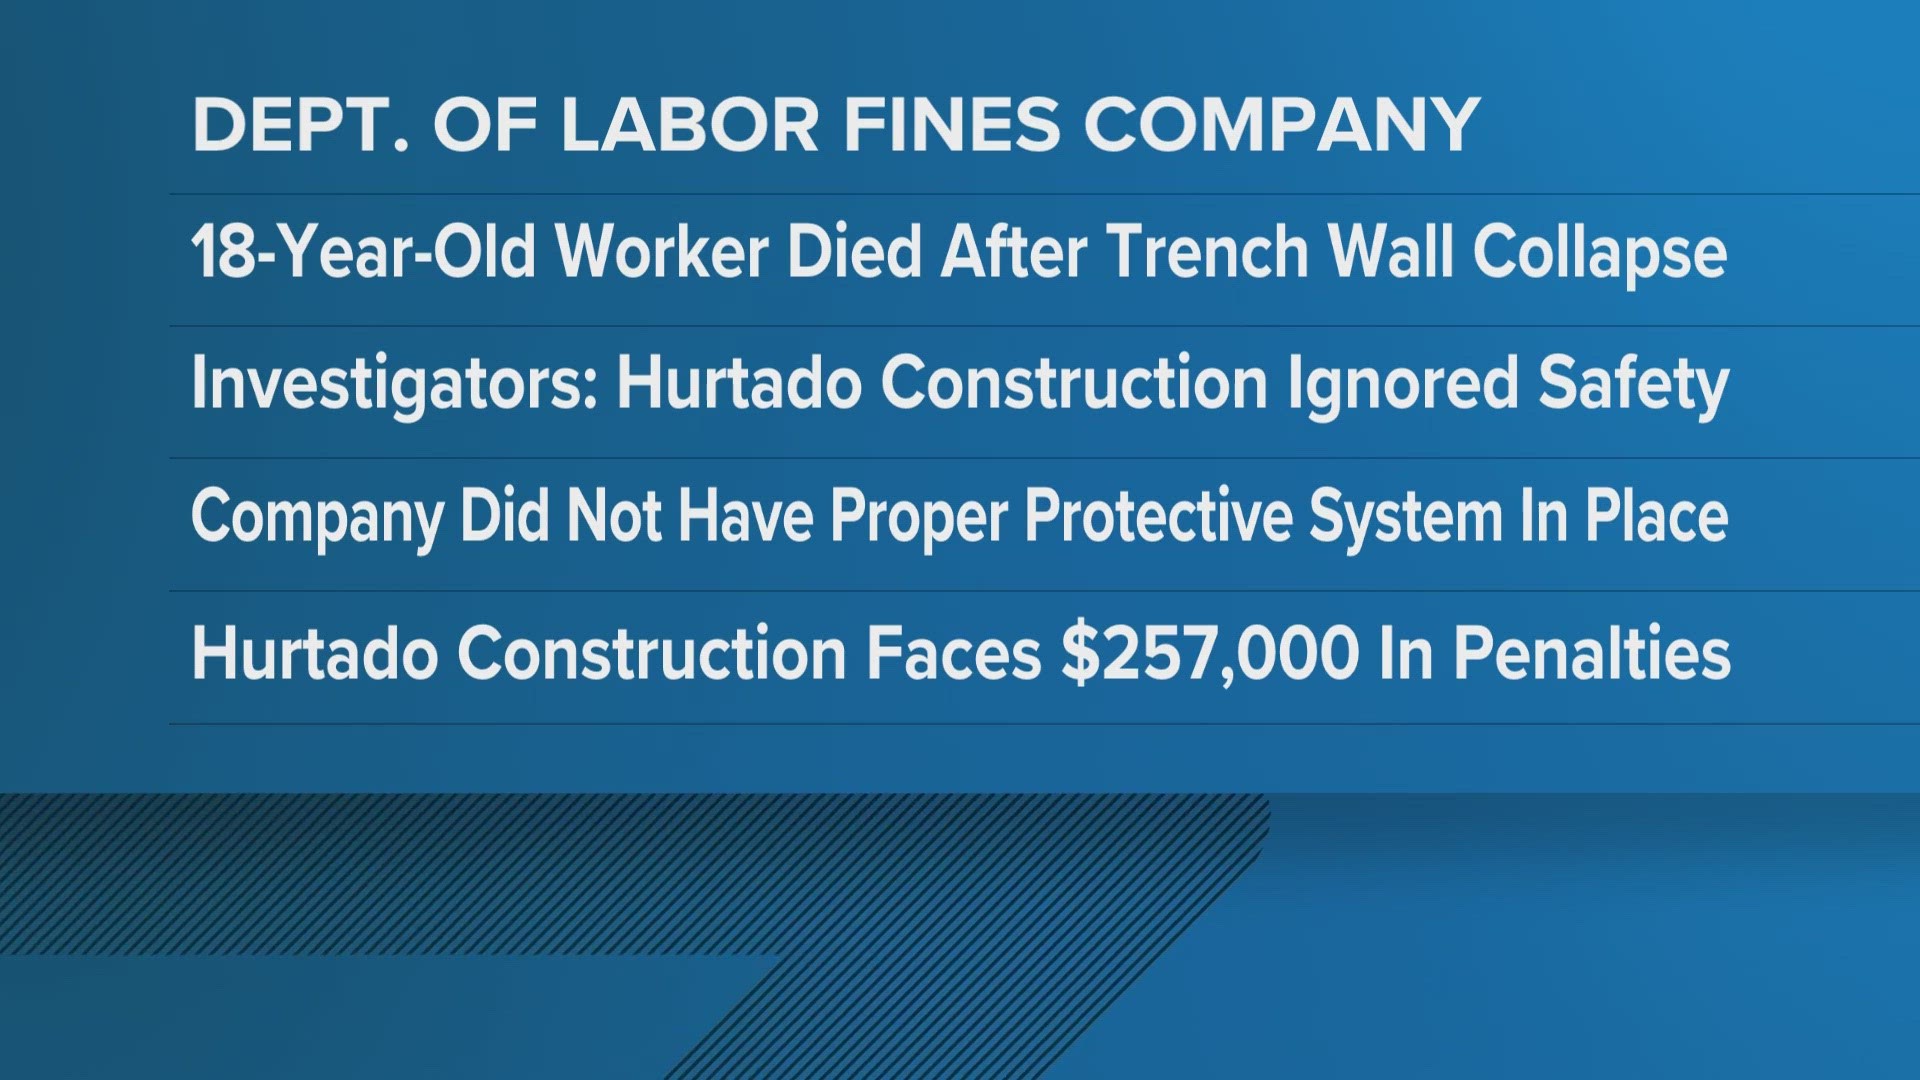 Hurtado Construction is facing more than $250K in penalties from last year's trench collapse. It's not their first time being cited by OSHA for dangerous conditions.